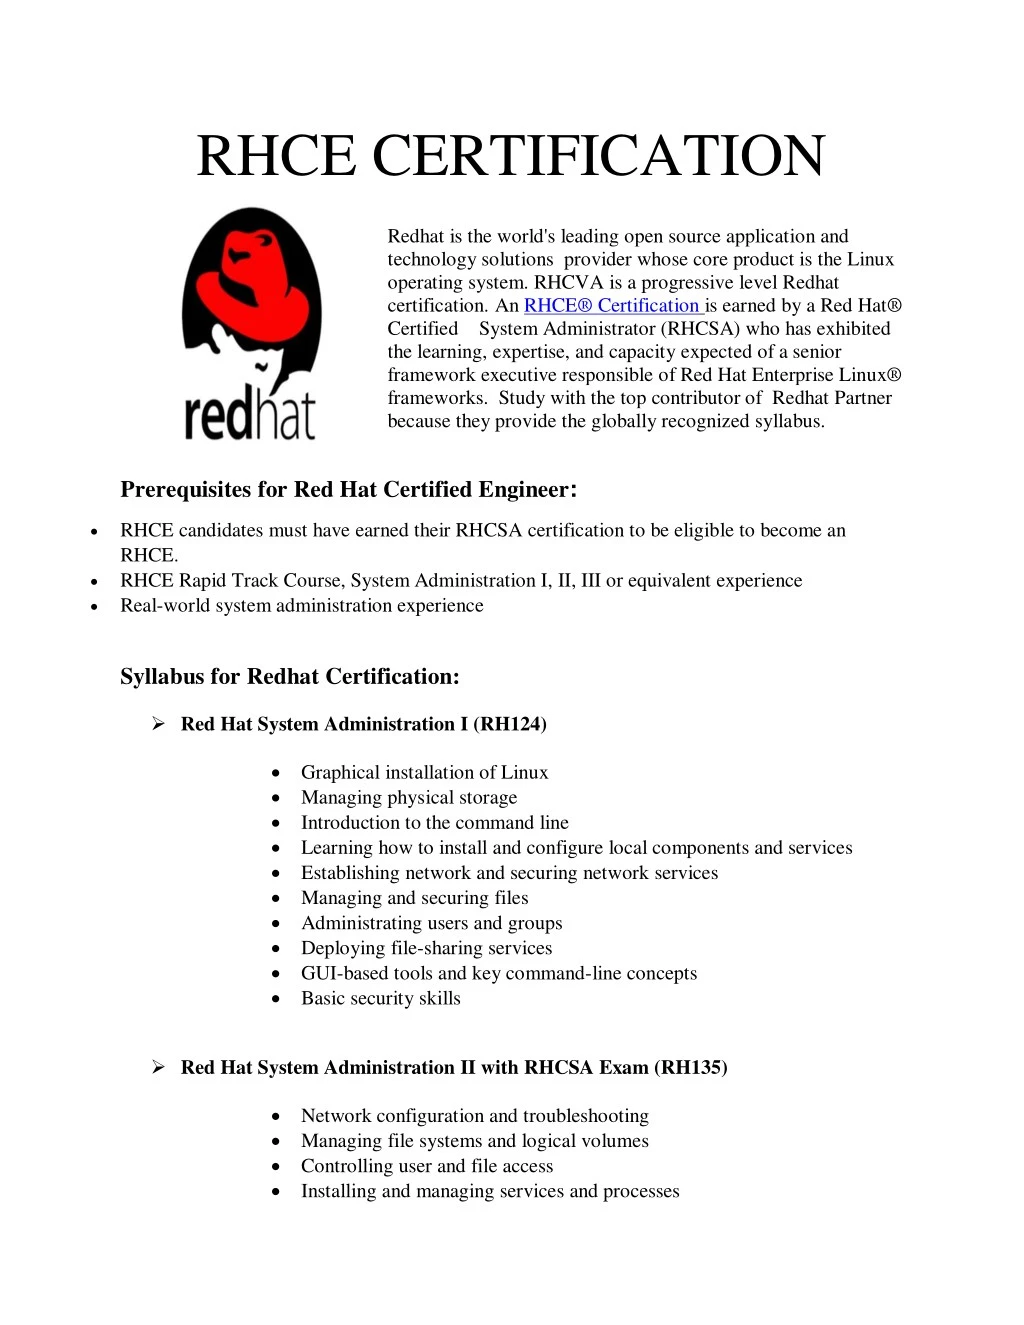 rhce certification redhat is the world s leading